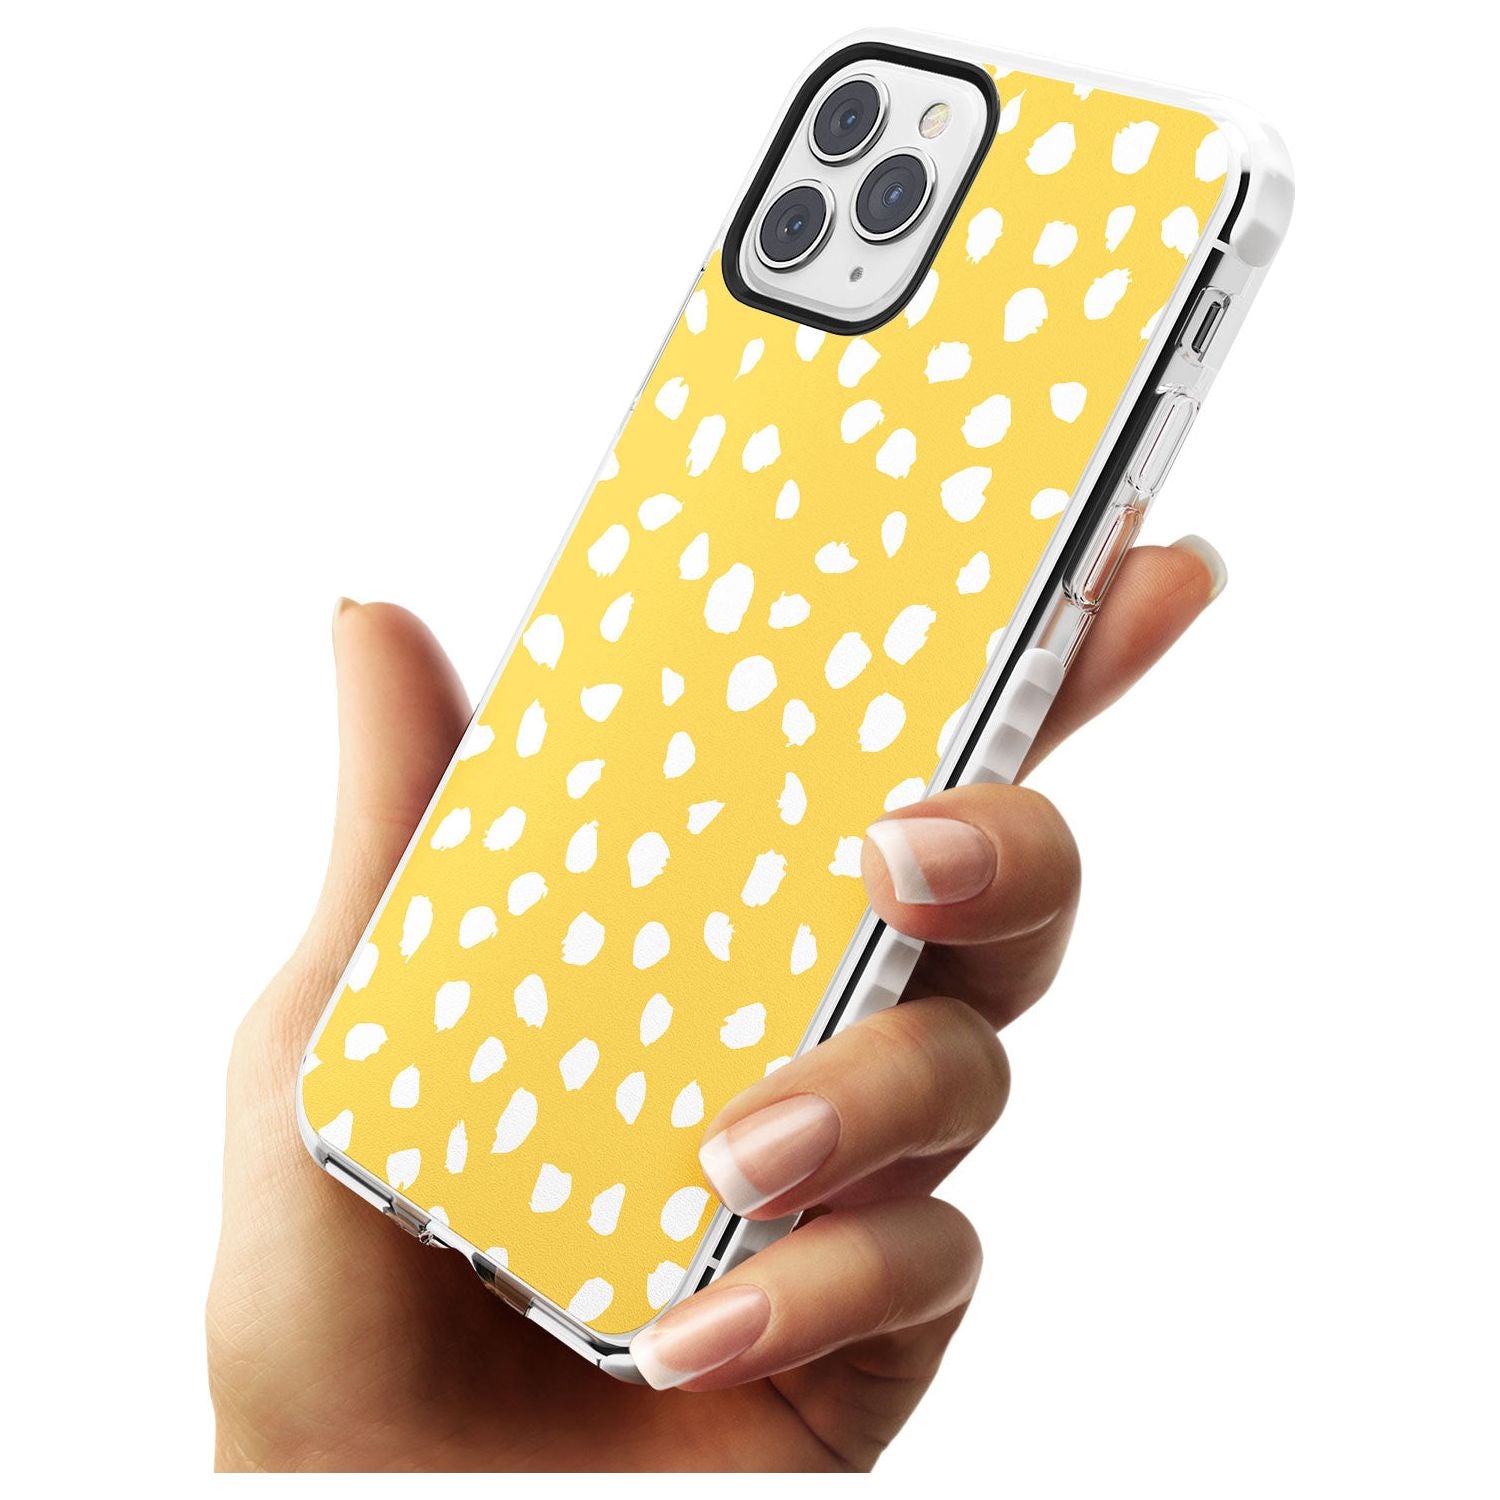 White on Yellow Dalmatian Polka Dot Spots Impact Phone Case for iPhone 11 Pro Max